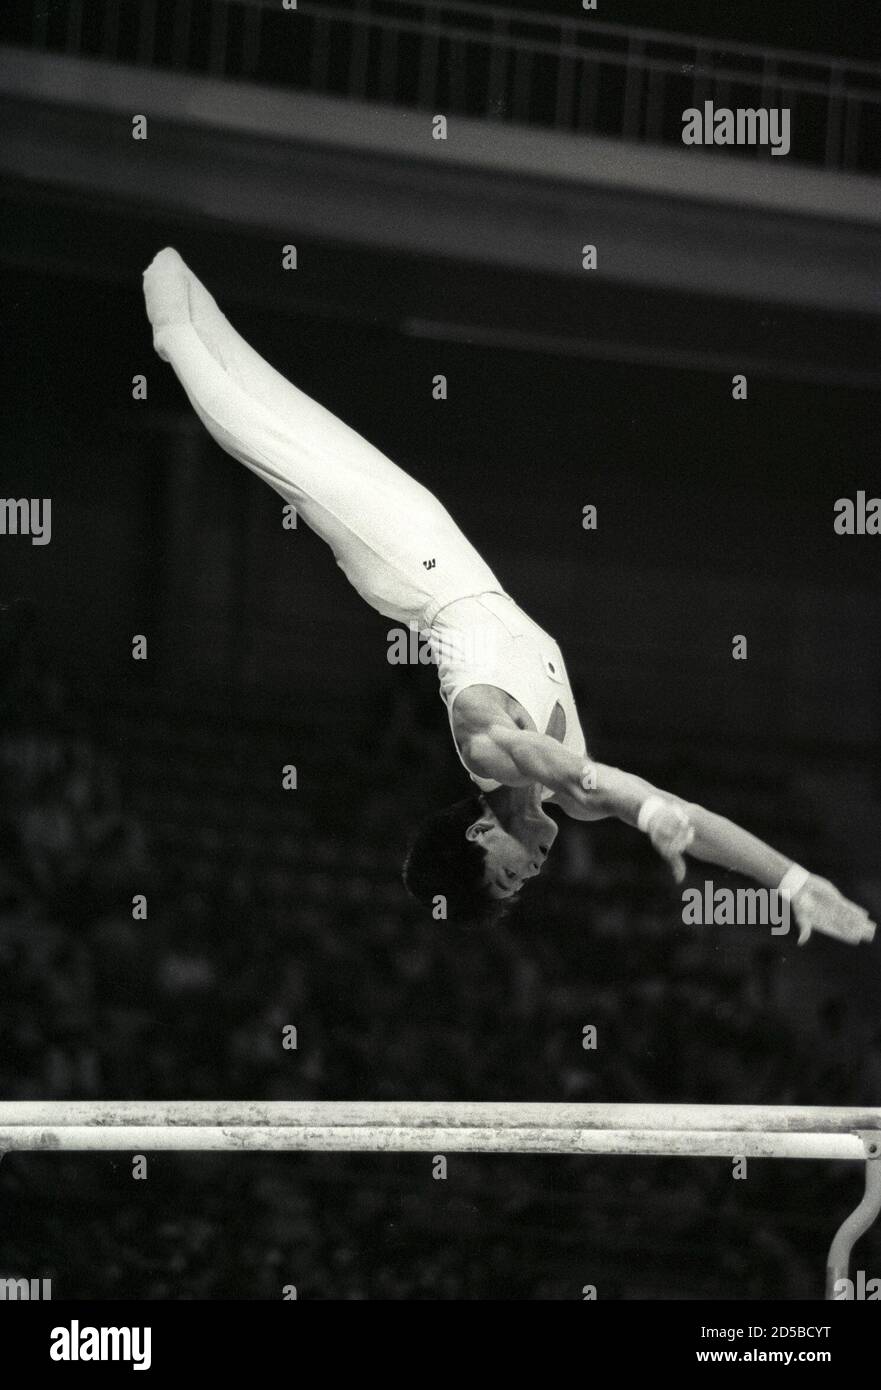 Koichi Mizushima of Japan executes a backflip over the parallel bars as he dismounts at the end of his routine during the men's team competition during the 1986 Asian Games in Seoul September 21, 1986. SCANNED FROM NEGATIVE. REUTERS/Shunsuke Akatsuka  GDB/CMC/PN Stock Photo